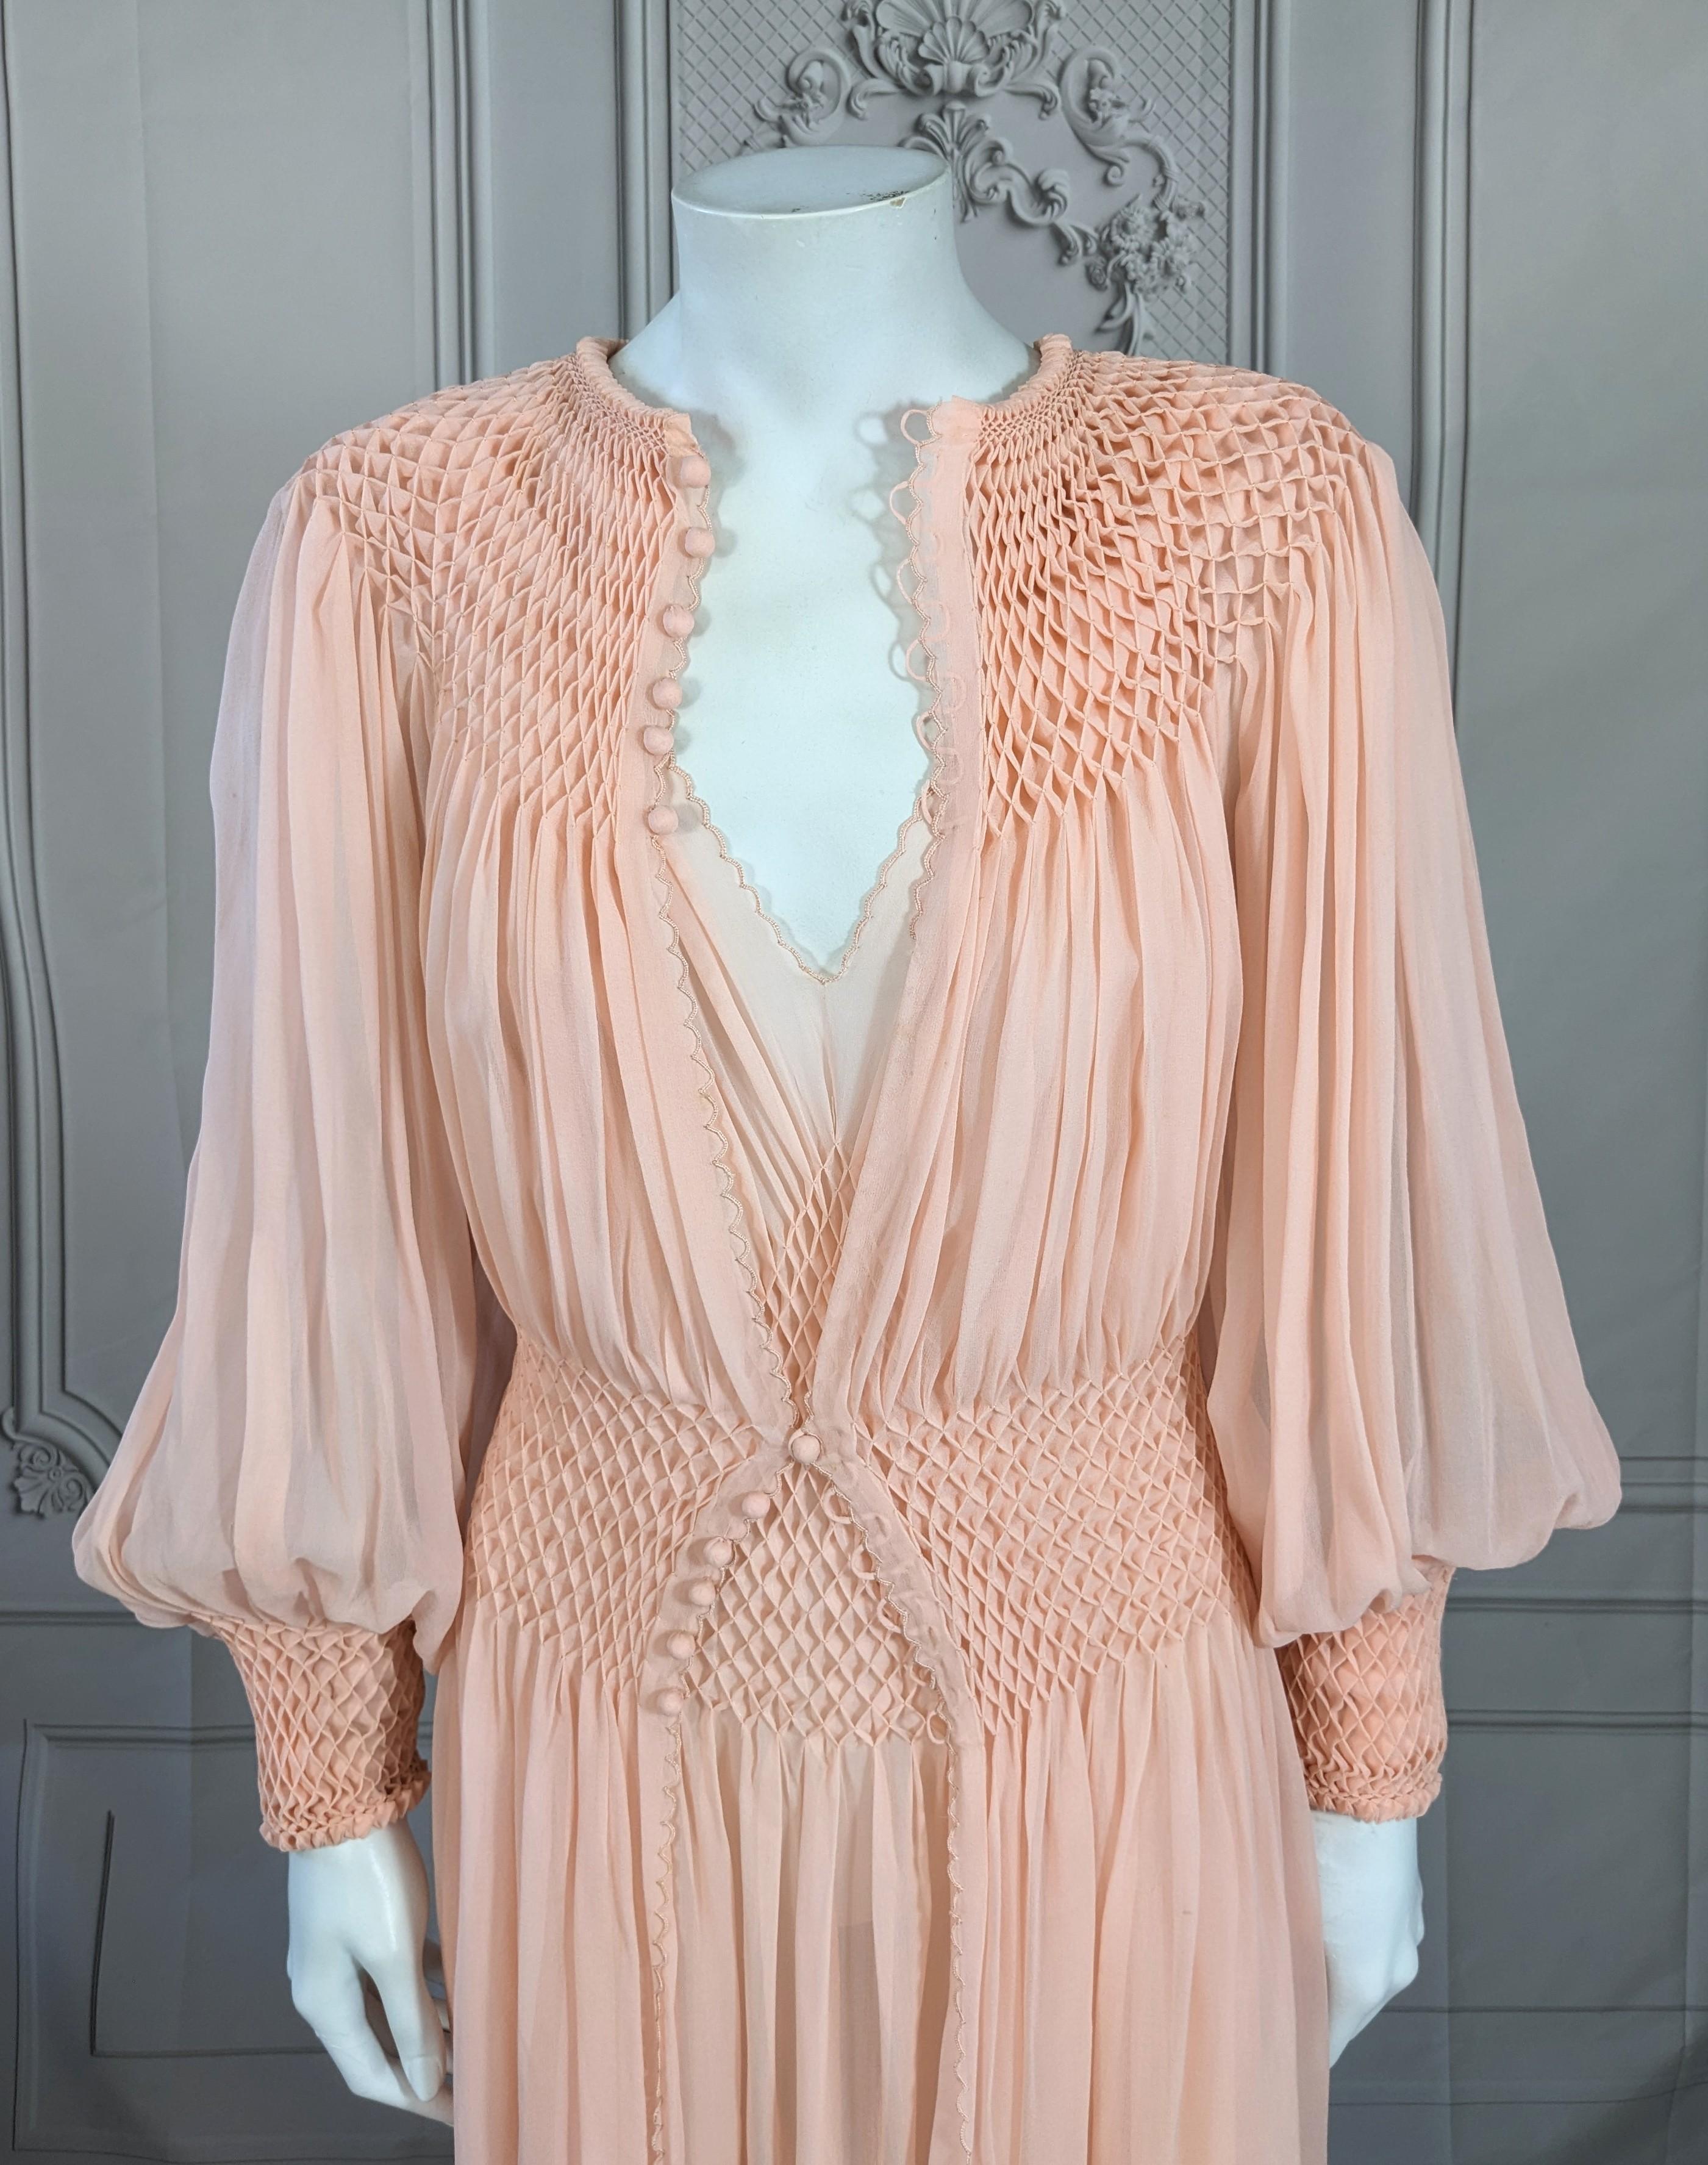 Art Deco Silk Chiffon Smocked Ensemble In Excellent Condition For Sale In New York, NY